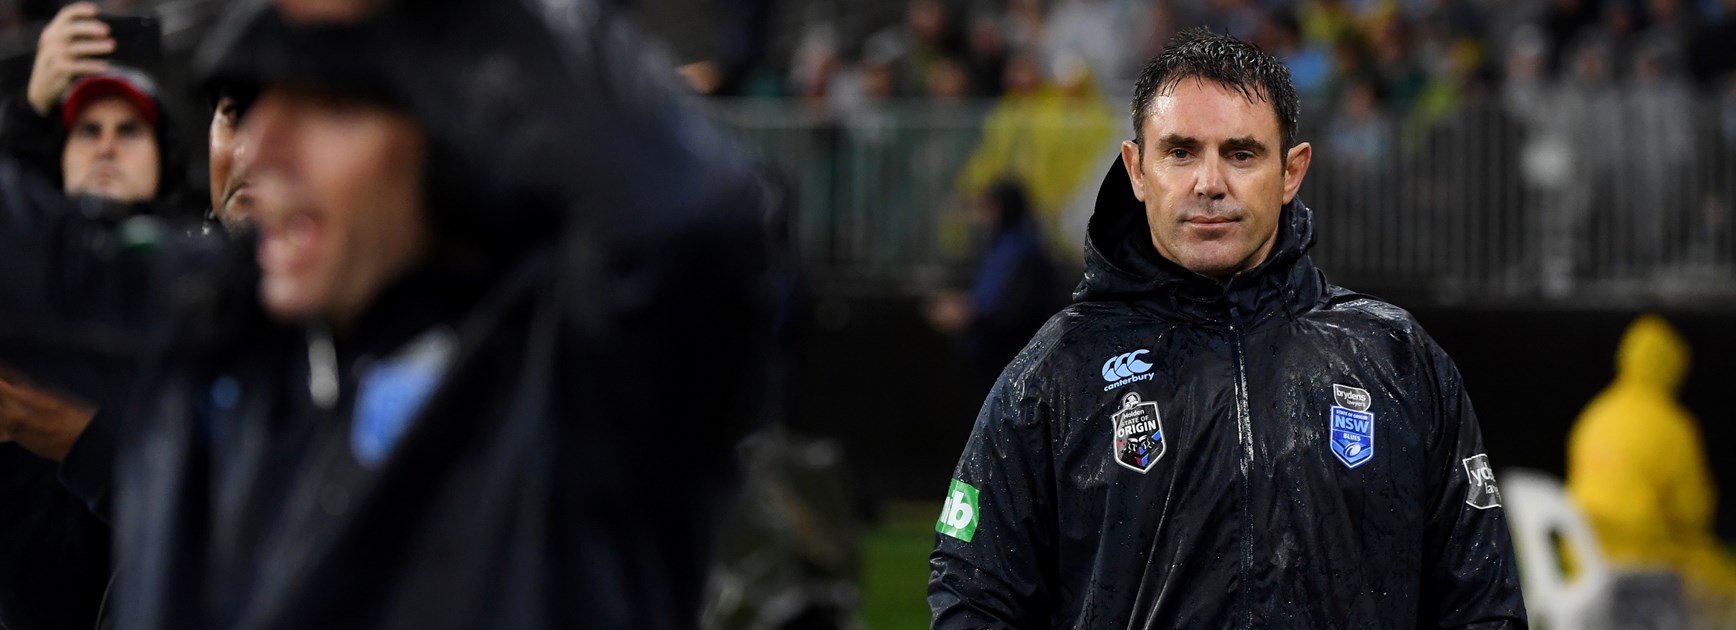 Fittler calls on refs to keep late hits in line